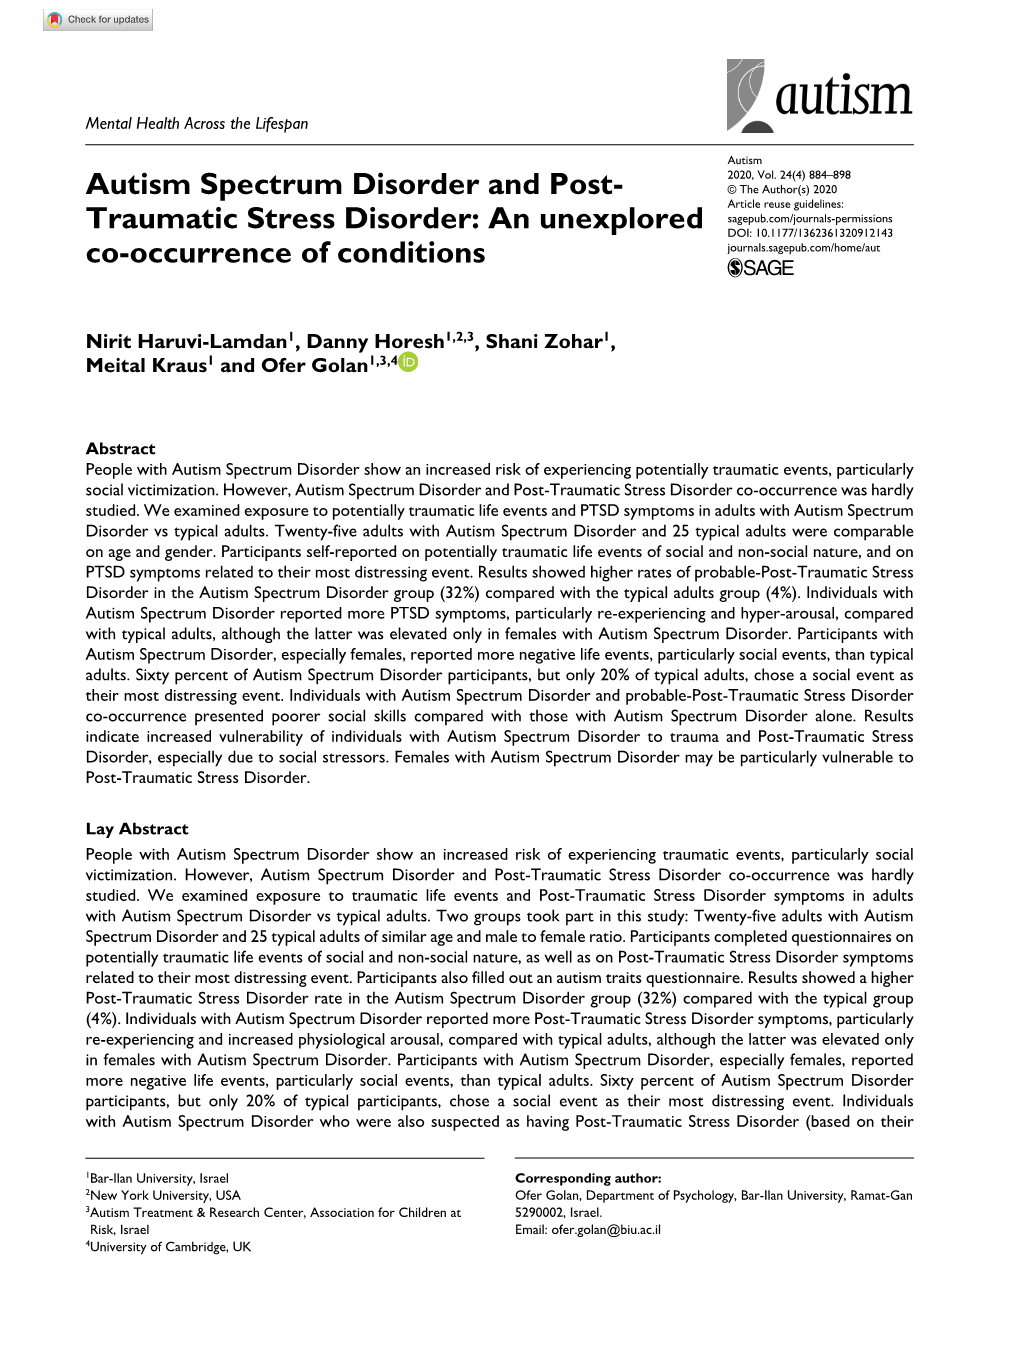 Autism Spectrum Disorder and Post-Traumatic Stress Disorder: An